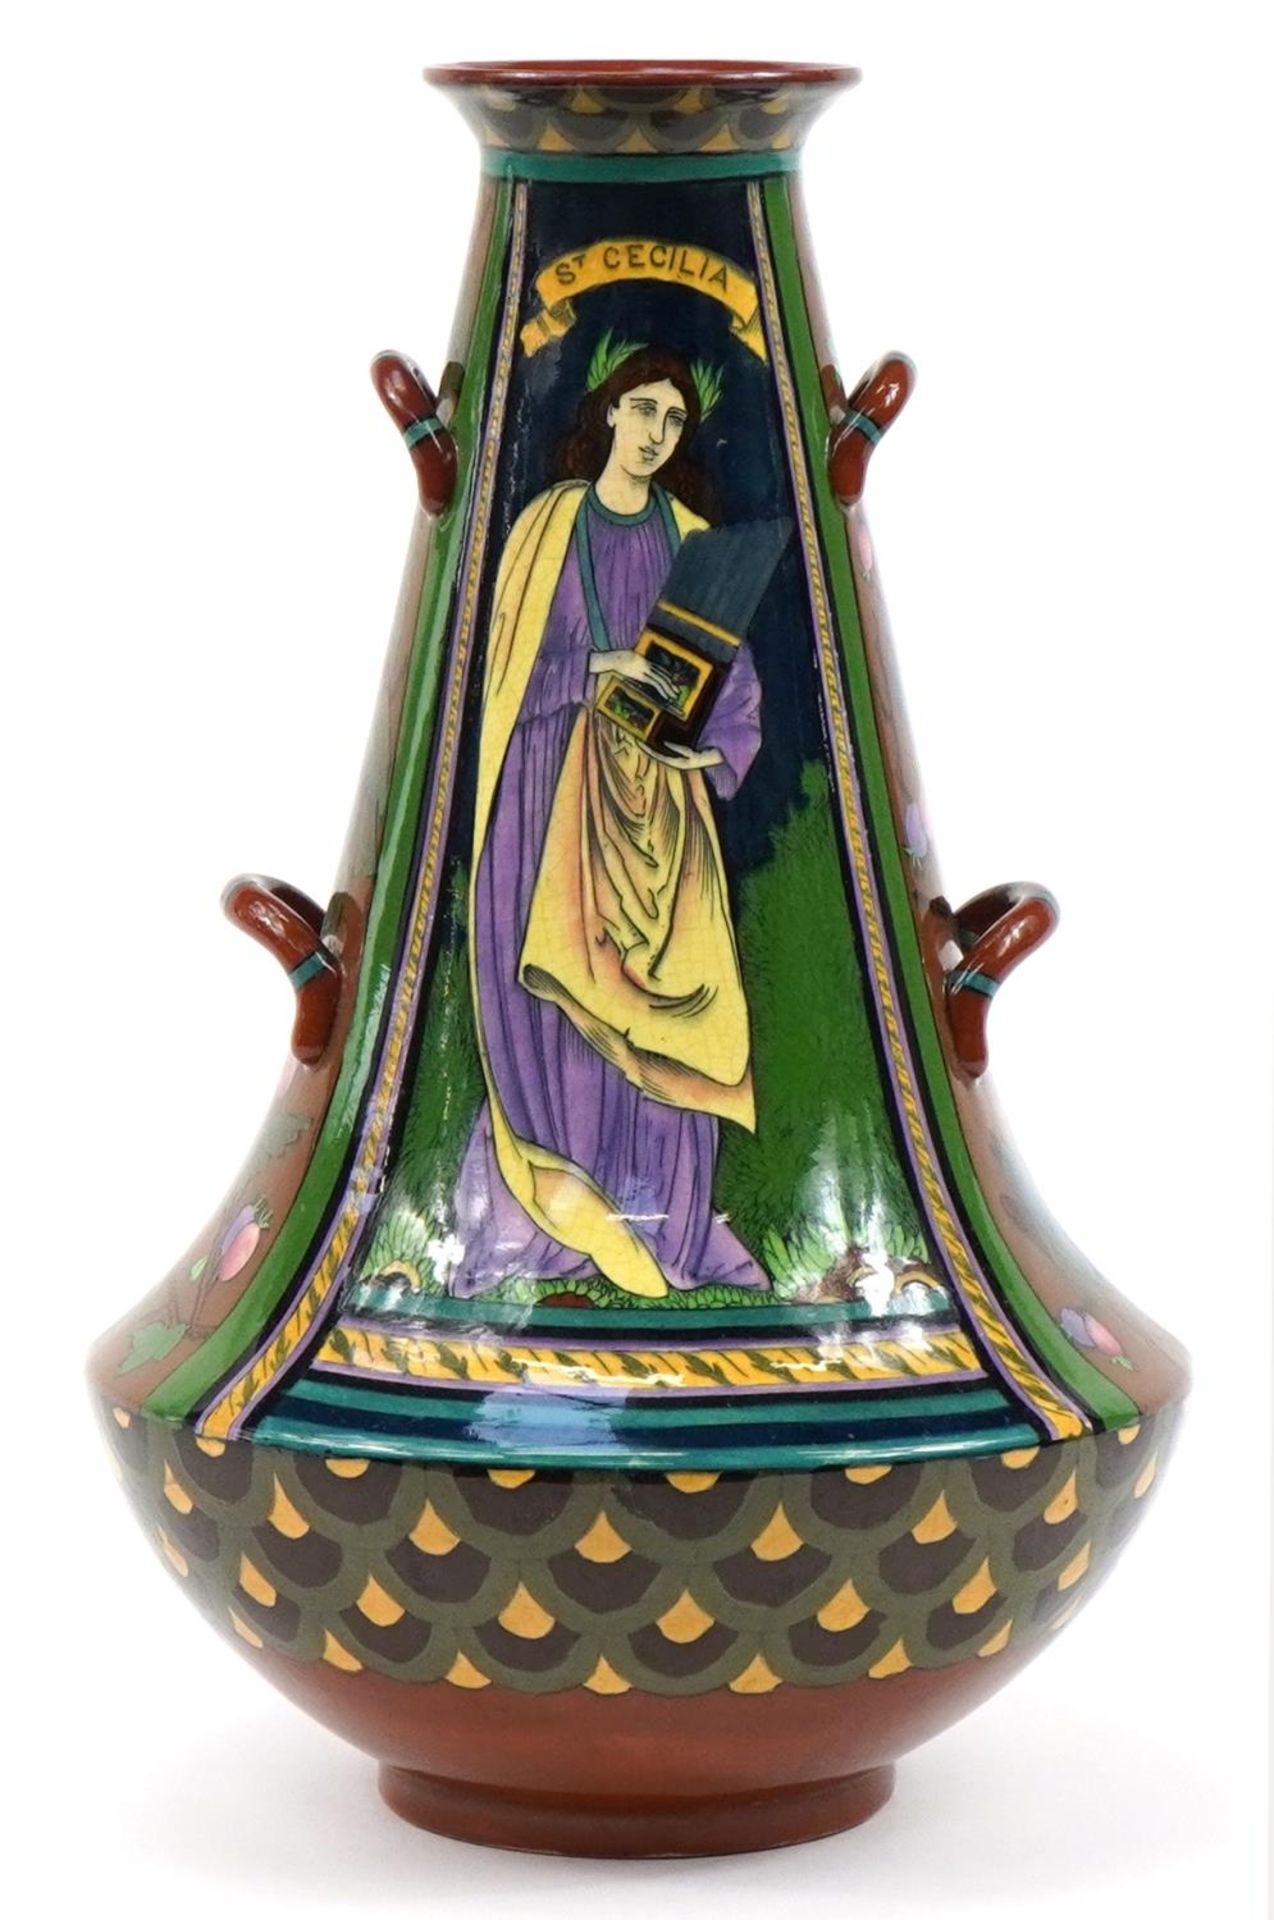 Foley Intarsio, Art Nouveau four handled vase hand painted with St Cecilia, numbered 4032, 42cm high